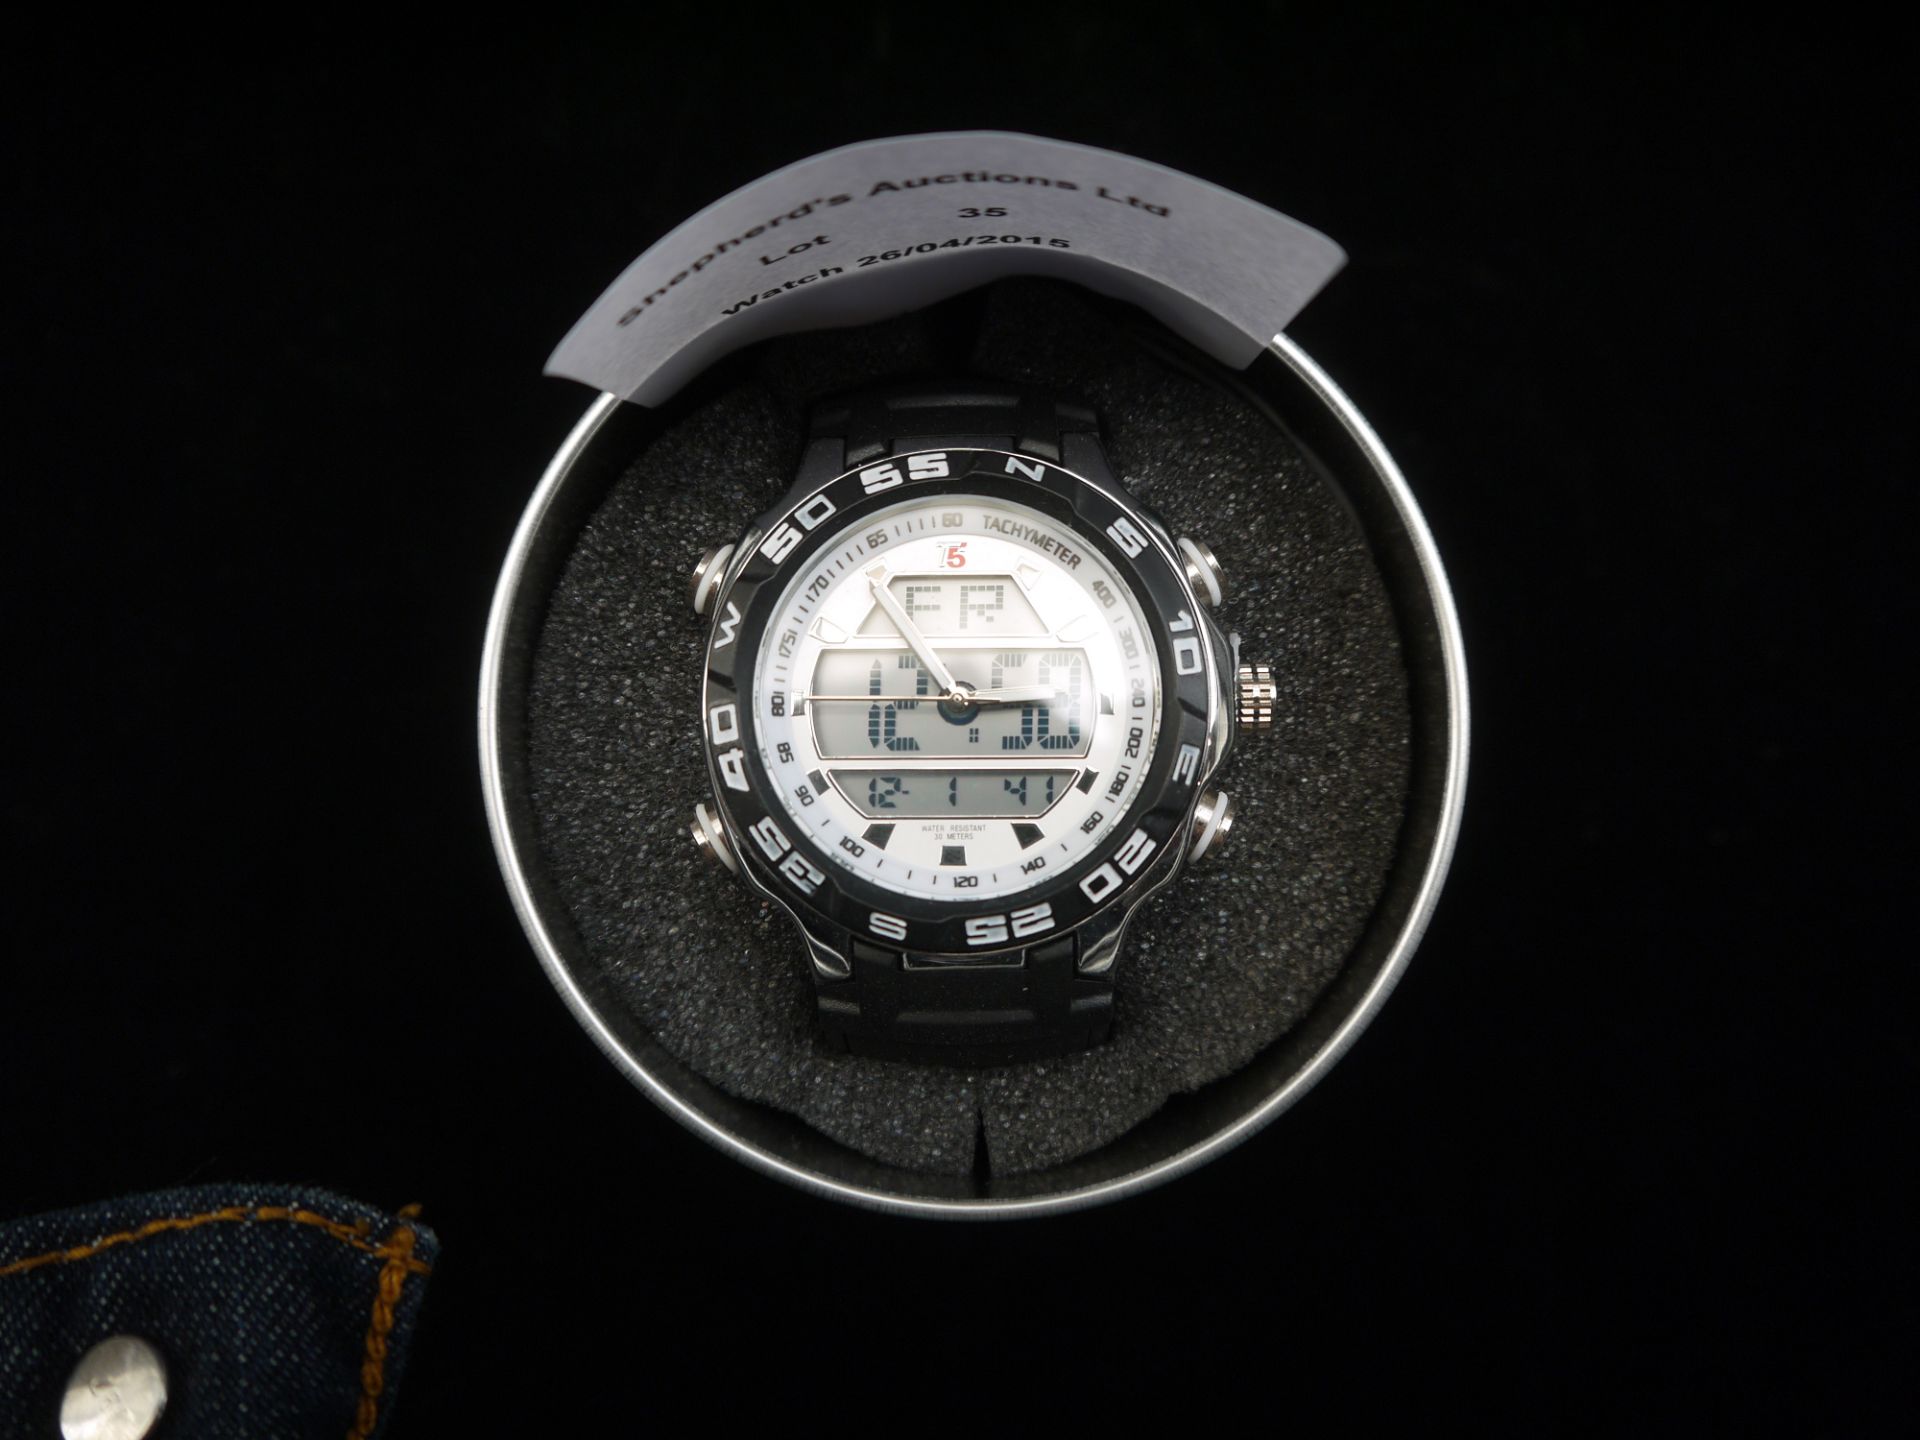 The T5 Jerez J2 has a black digital dial and case. Alarm, Chronograph and Date Function with Black